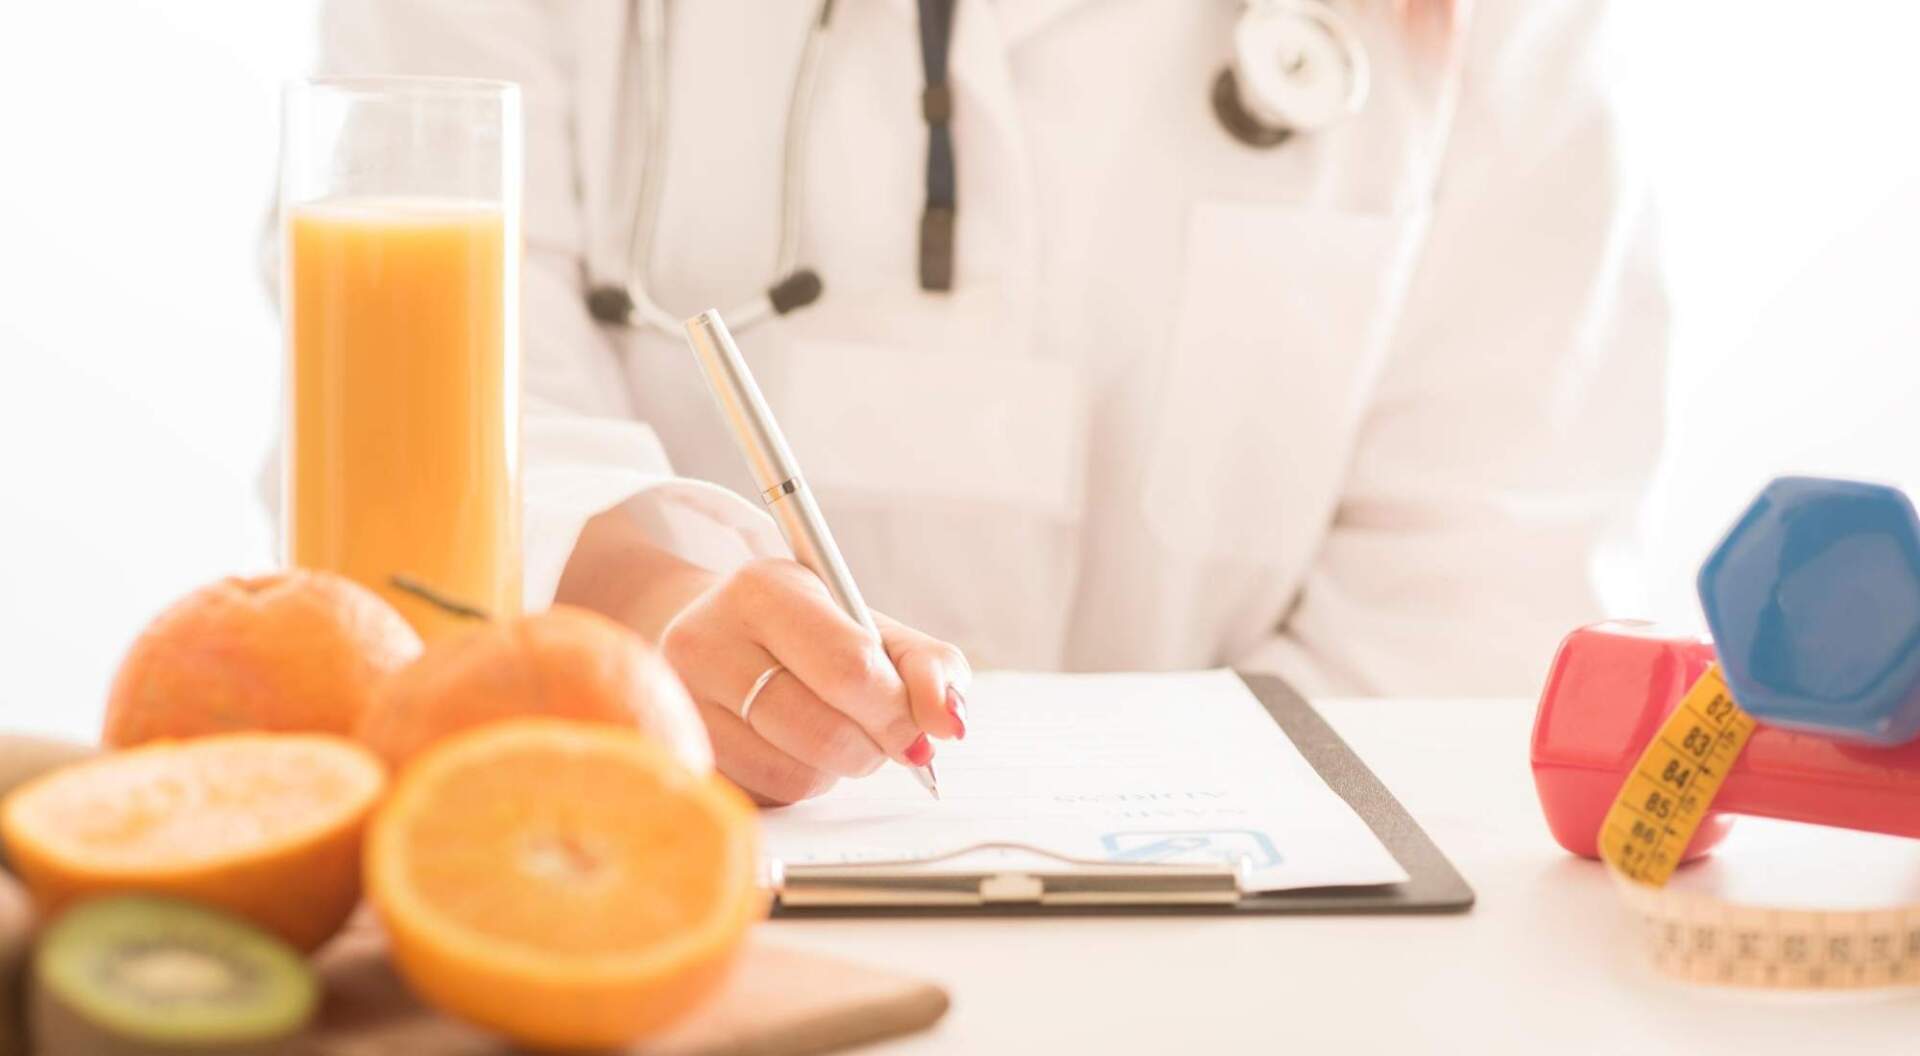 How Much Does Nutrition Response Testing Cost?